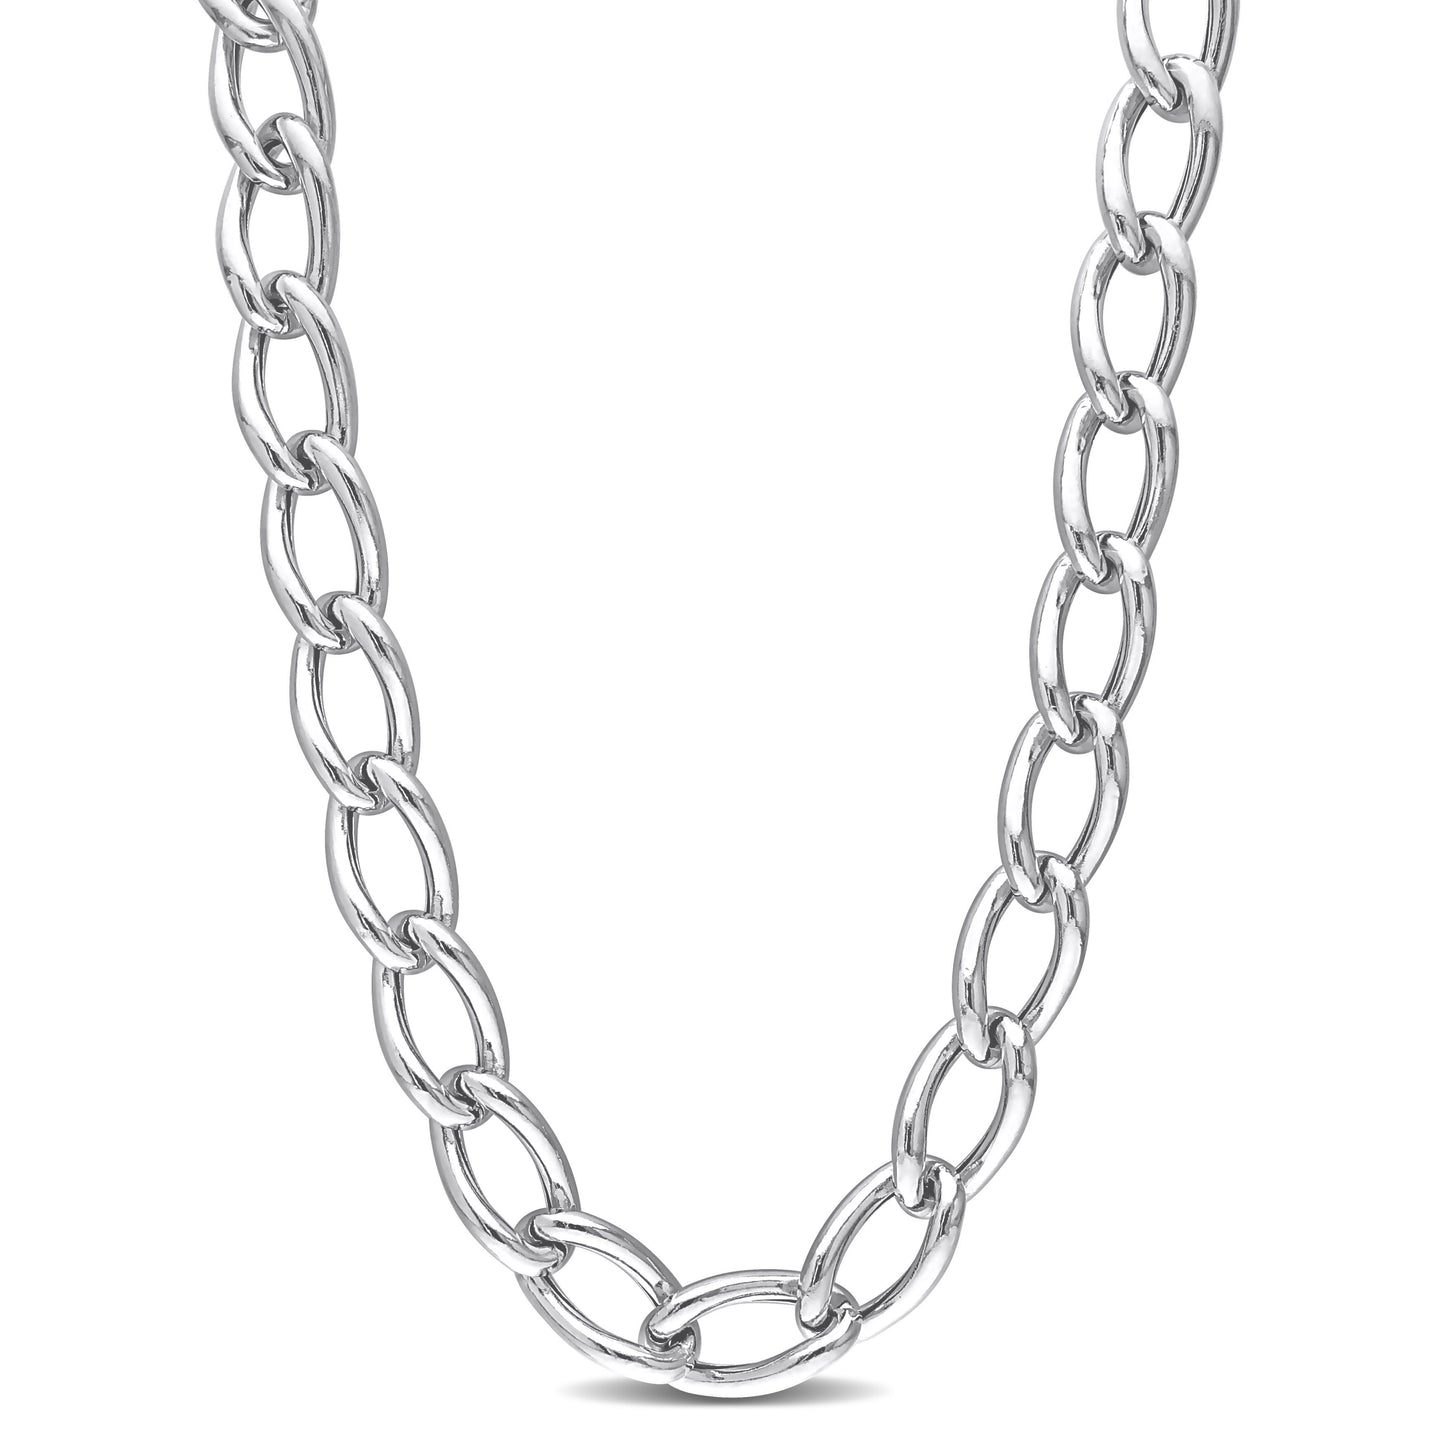 Sterling Silver Hallow Chain in 12.5mm